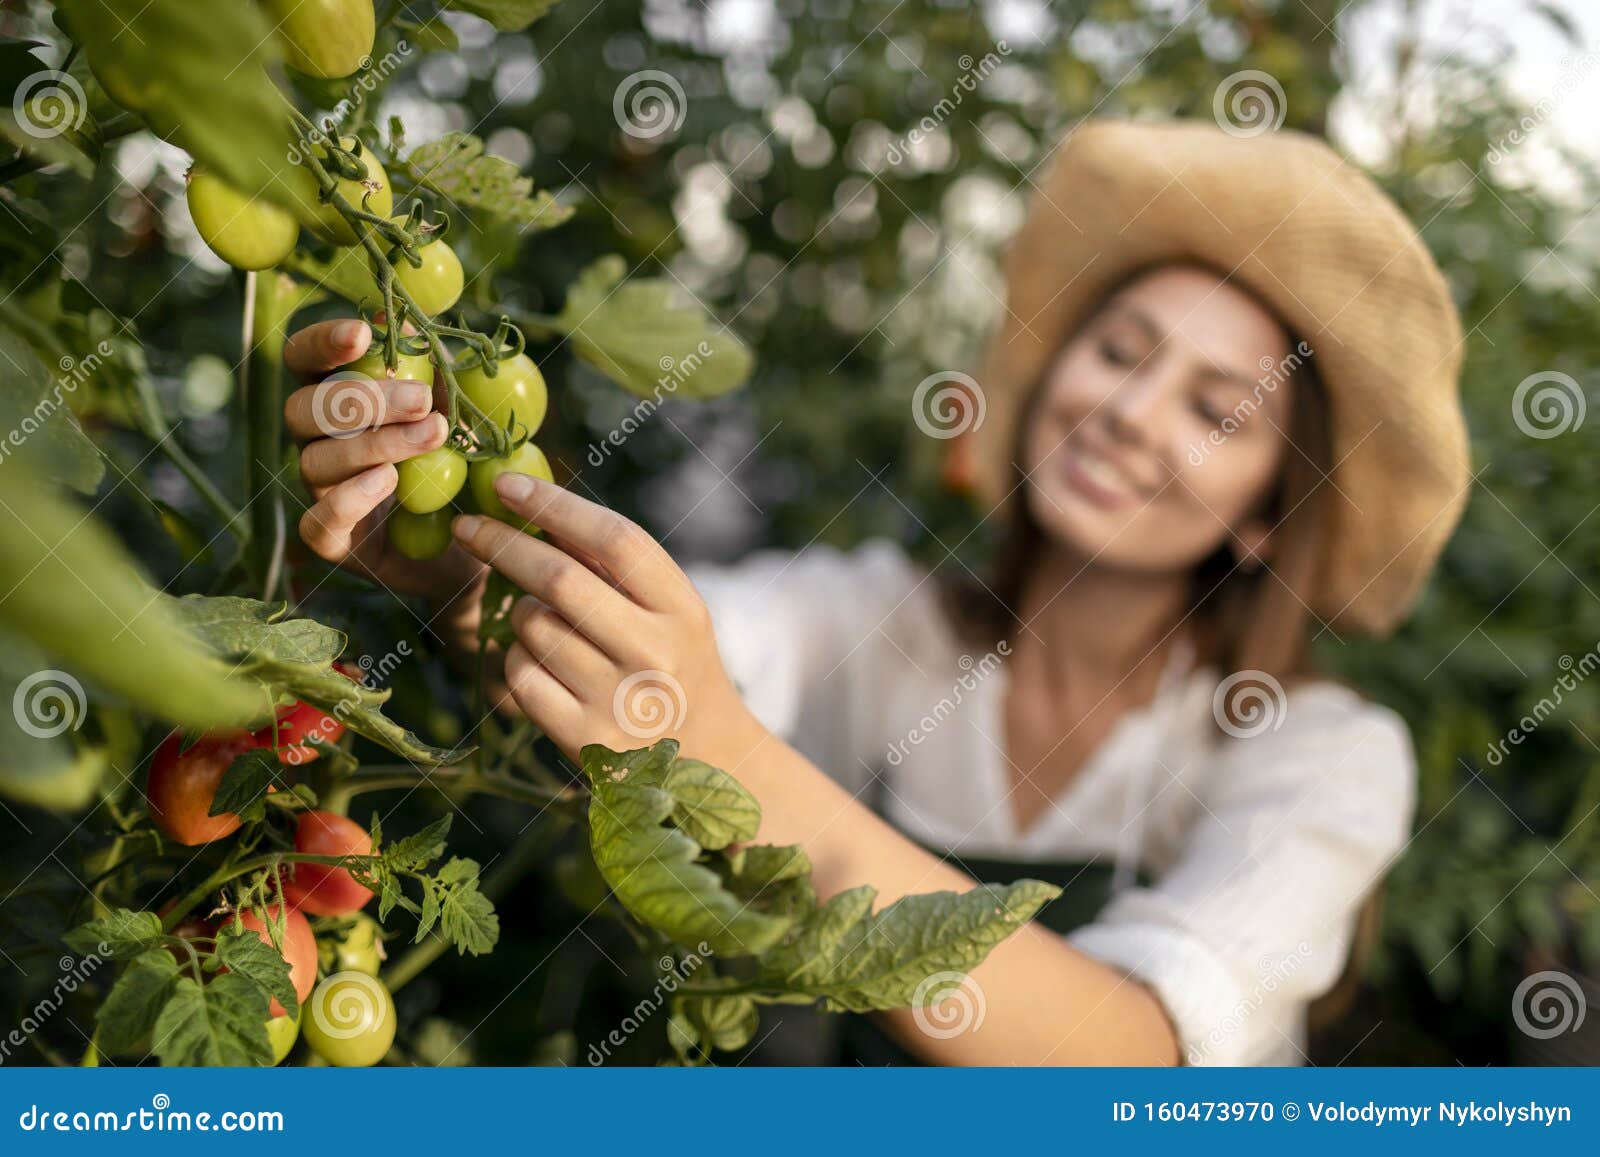 closeup young woman inspecting tomato plantings